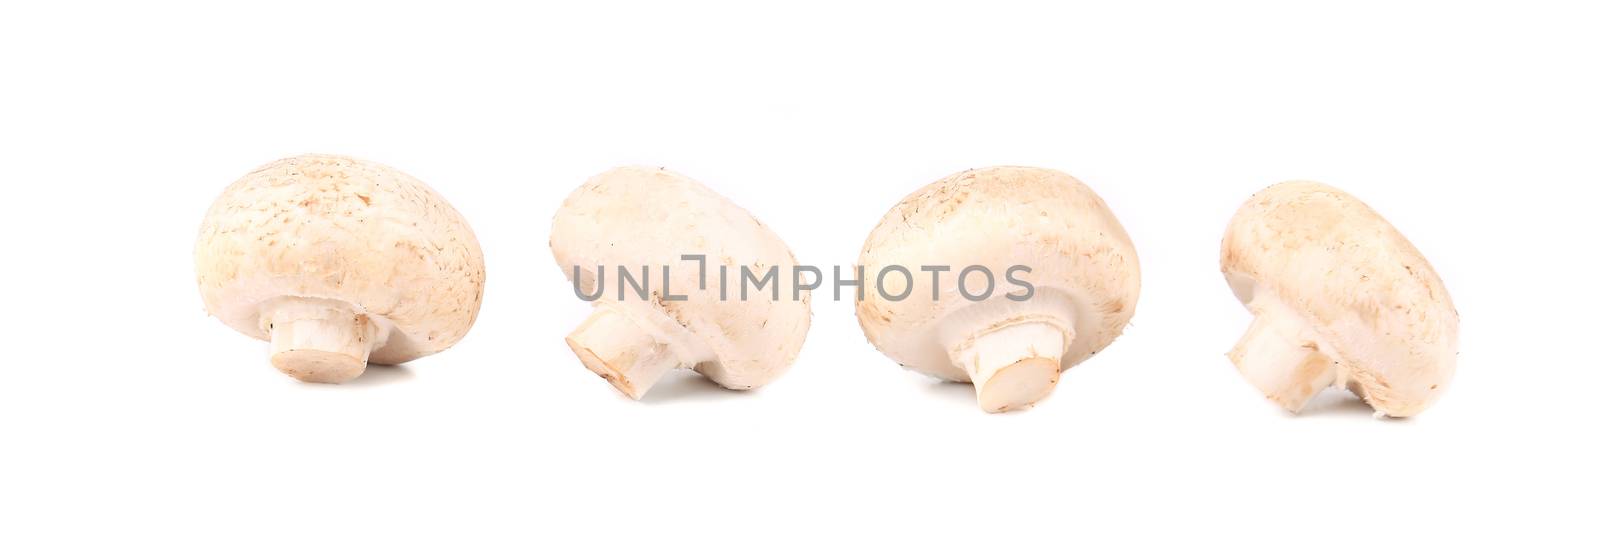 White mushrooms close up. Isolated on a white background.